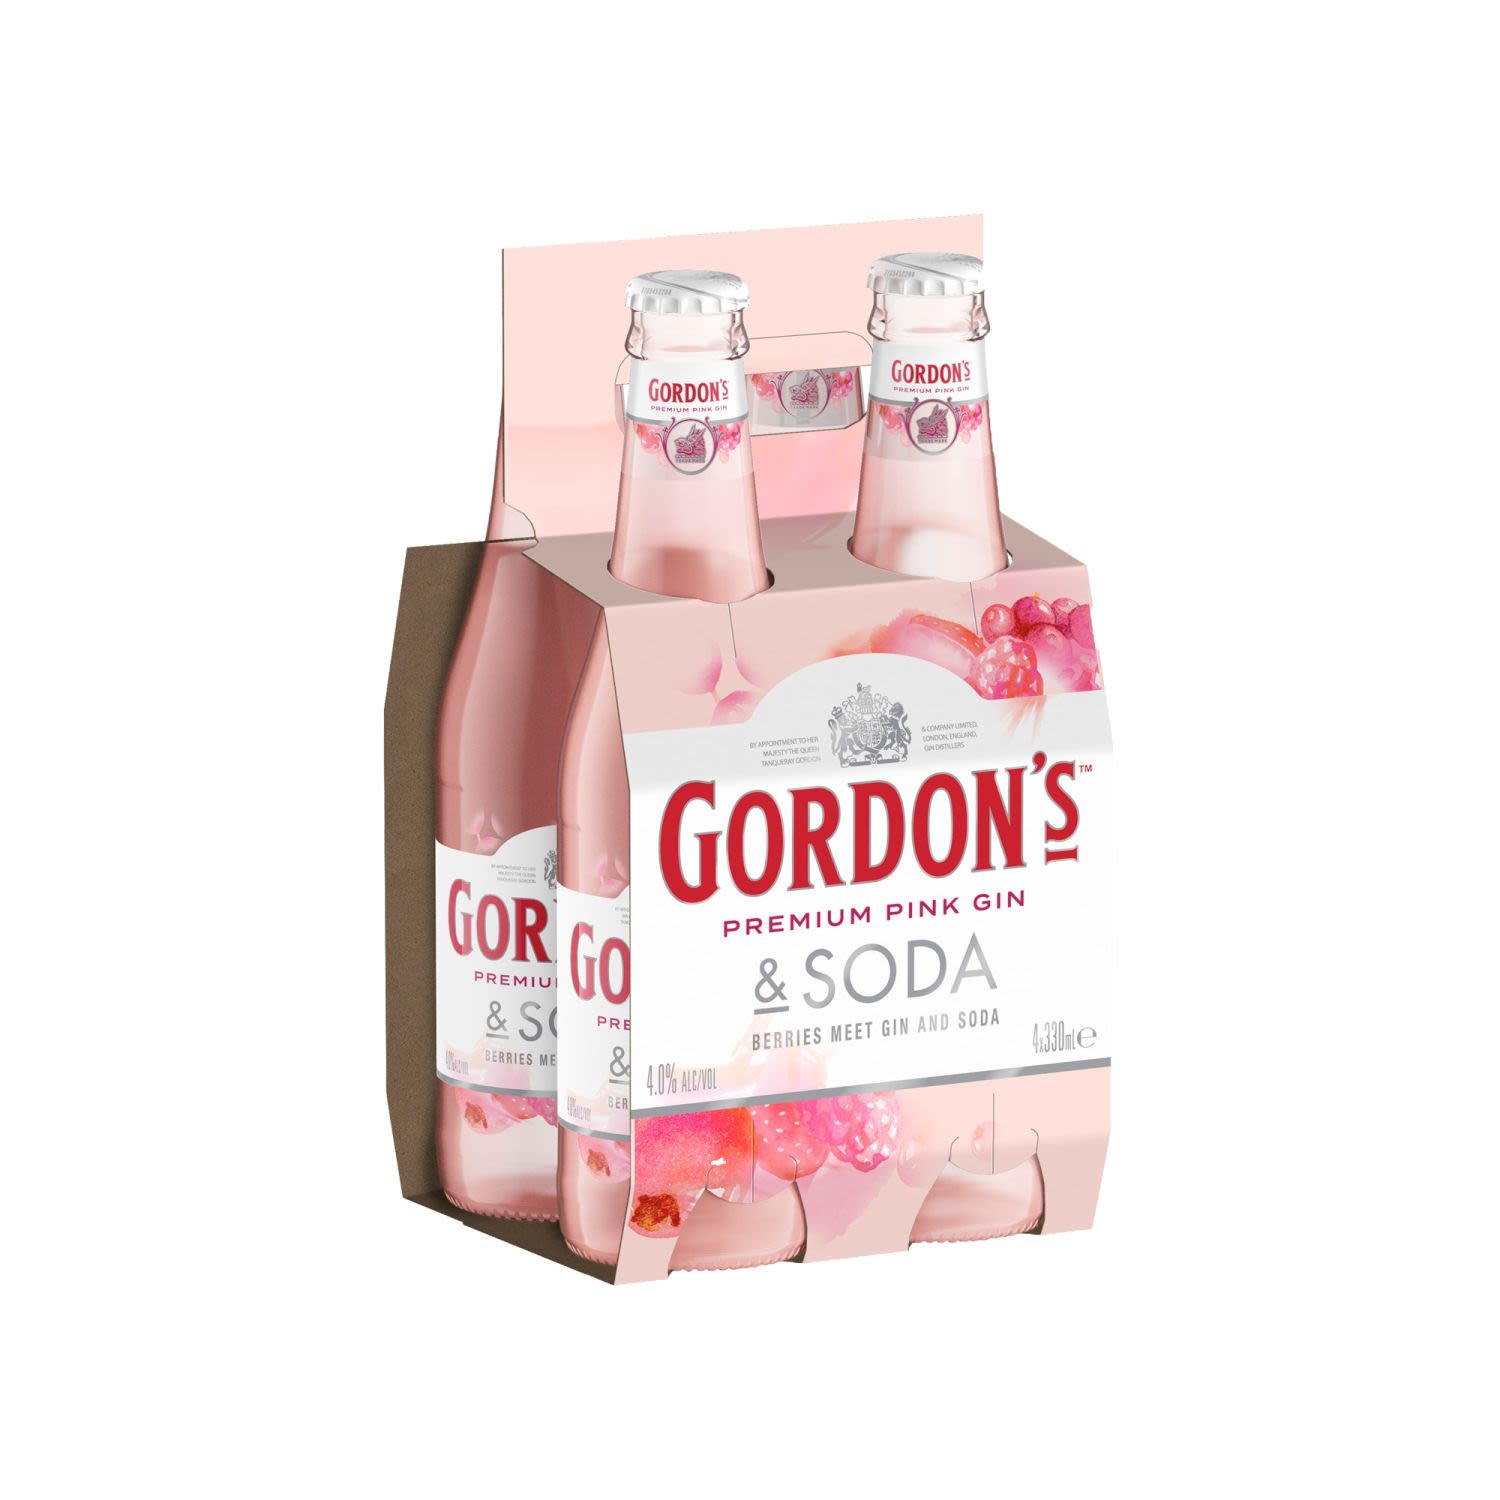 Gordon's Pink Gin and Soda Bottles 330mL - Gordon's Premium Pink Distilled Gin has been created to offer a sweeter and more accessible way to enjoy a gin. Crafted to balance the refreshing taste of Gordon's with the sweetness of raspberries and strawberries with the tang of redcurrant. Made using only the highest quality ingredients and only natural flavourings to provide an authentic real berry flavour.<br /> <br />Alcohol Volume: 4.00%<br /><br />Pack Format: 4 Pack<br /><br />Standard Drinks: 1</br /><br />Pack Type: Bottle<br />